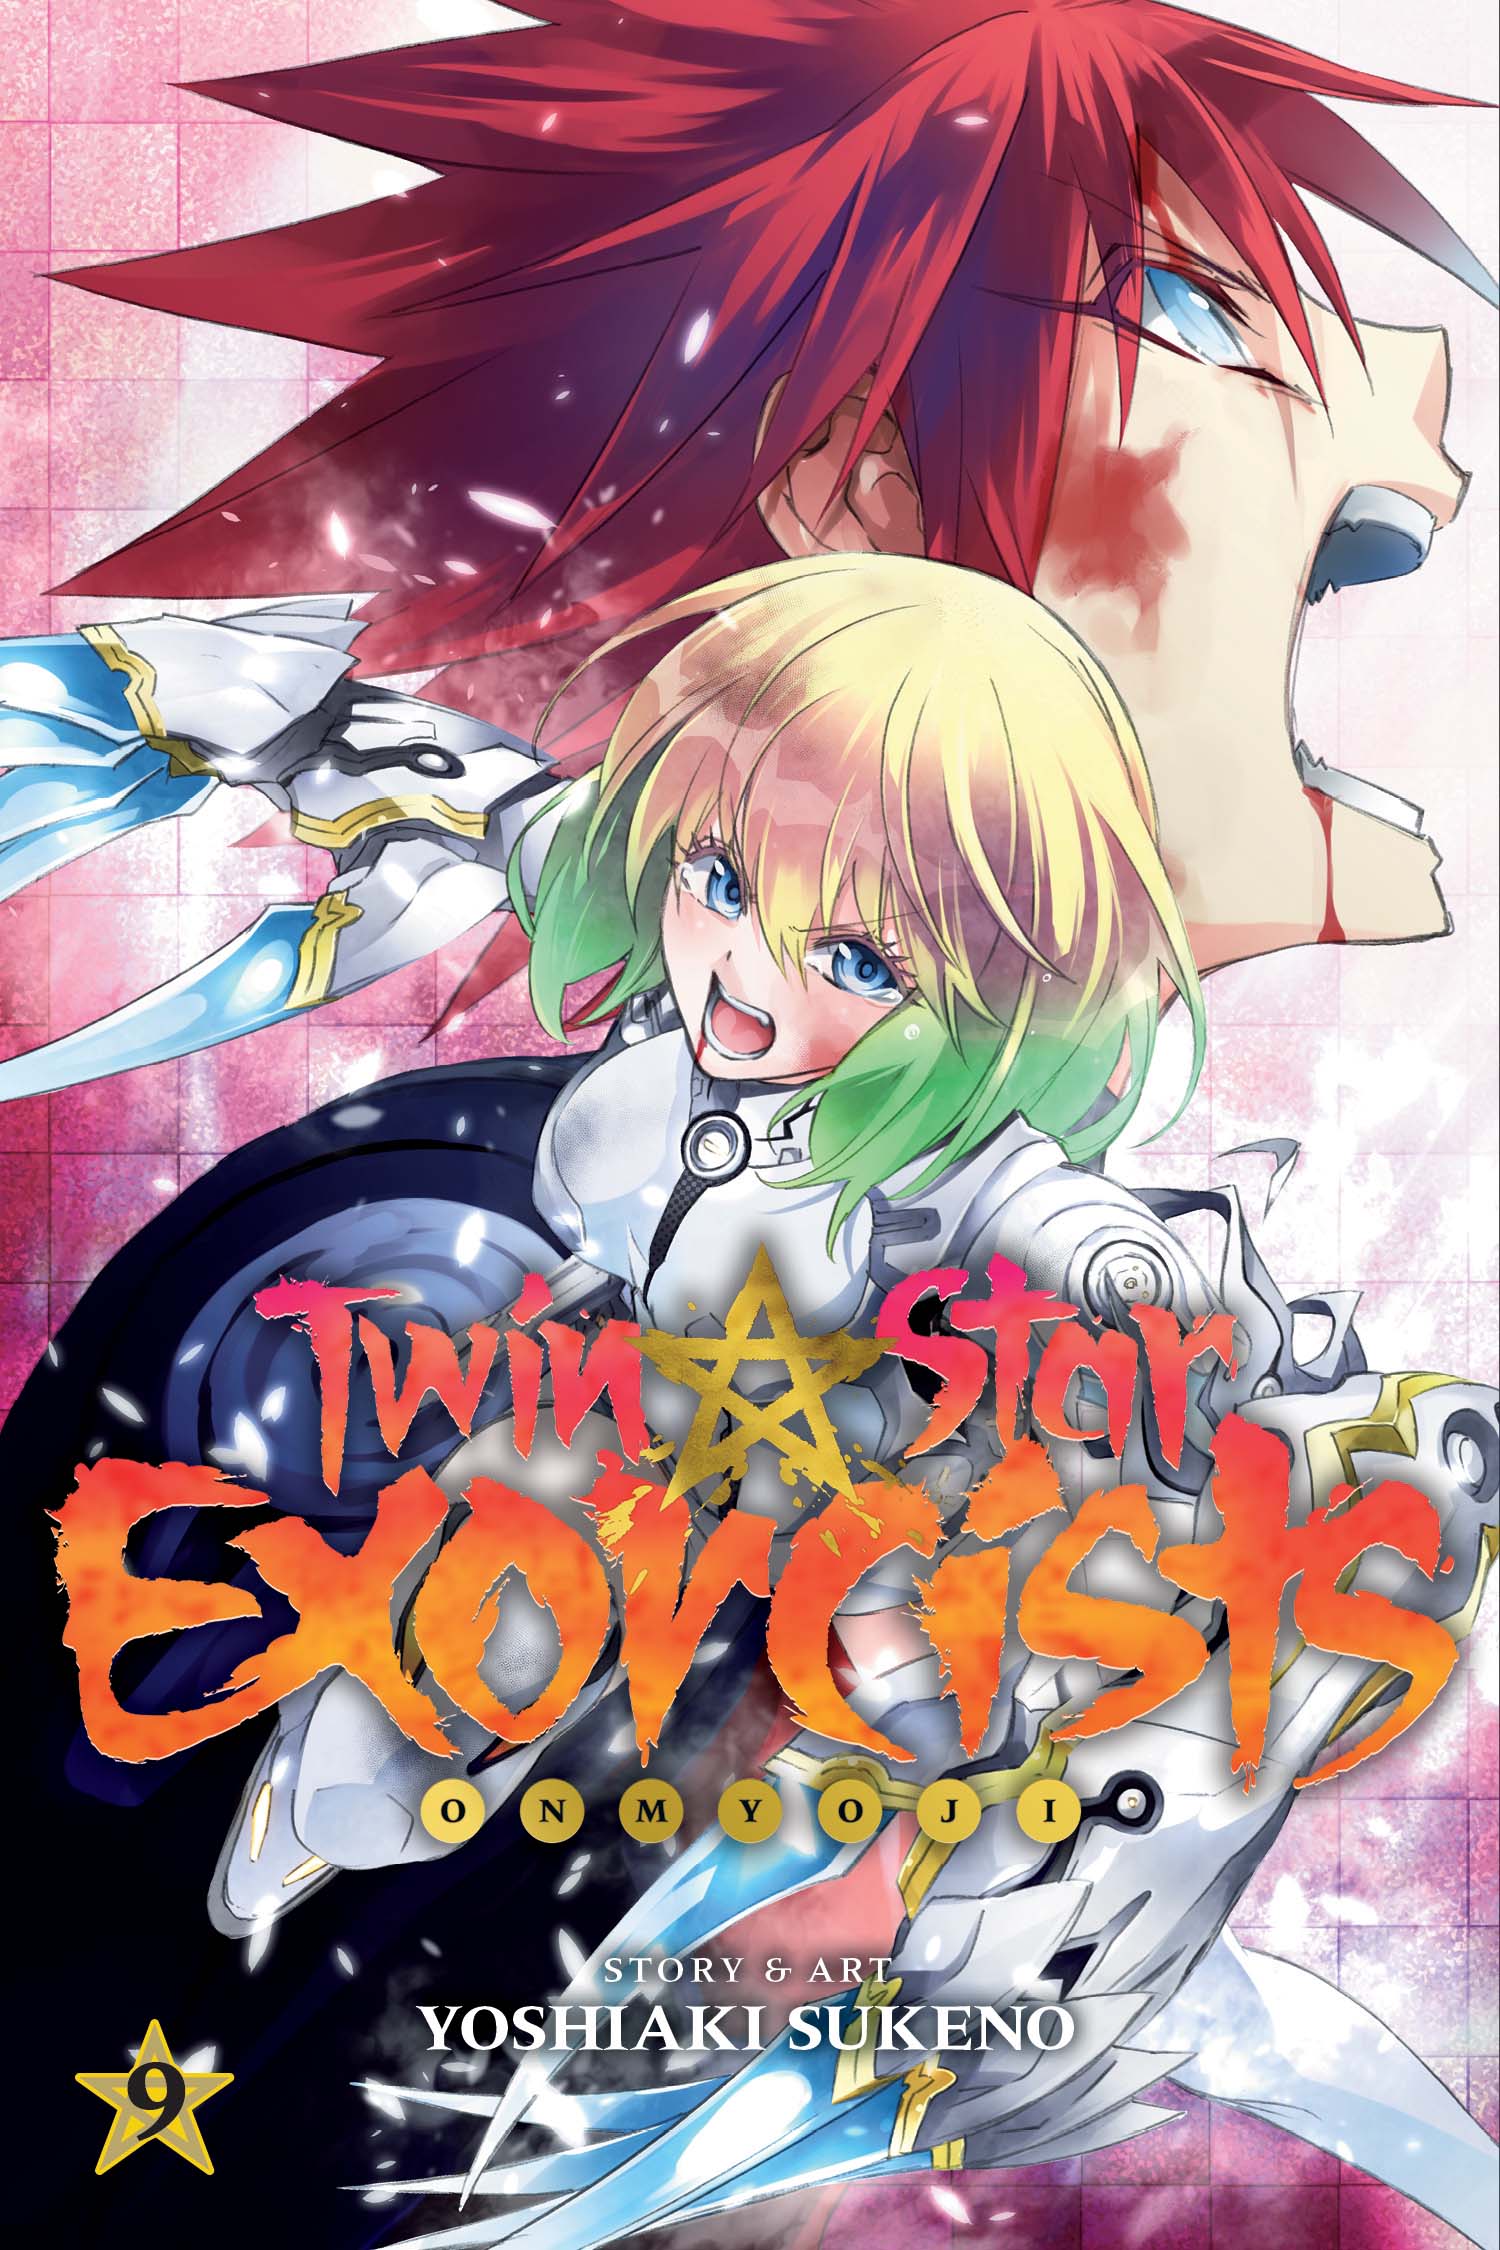 Donnell on X: I just started Twin Star Exorcists' manga. I like